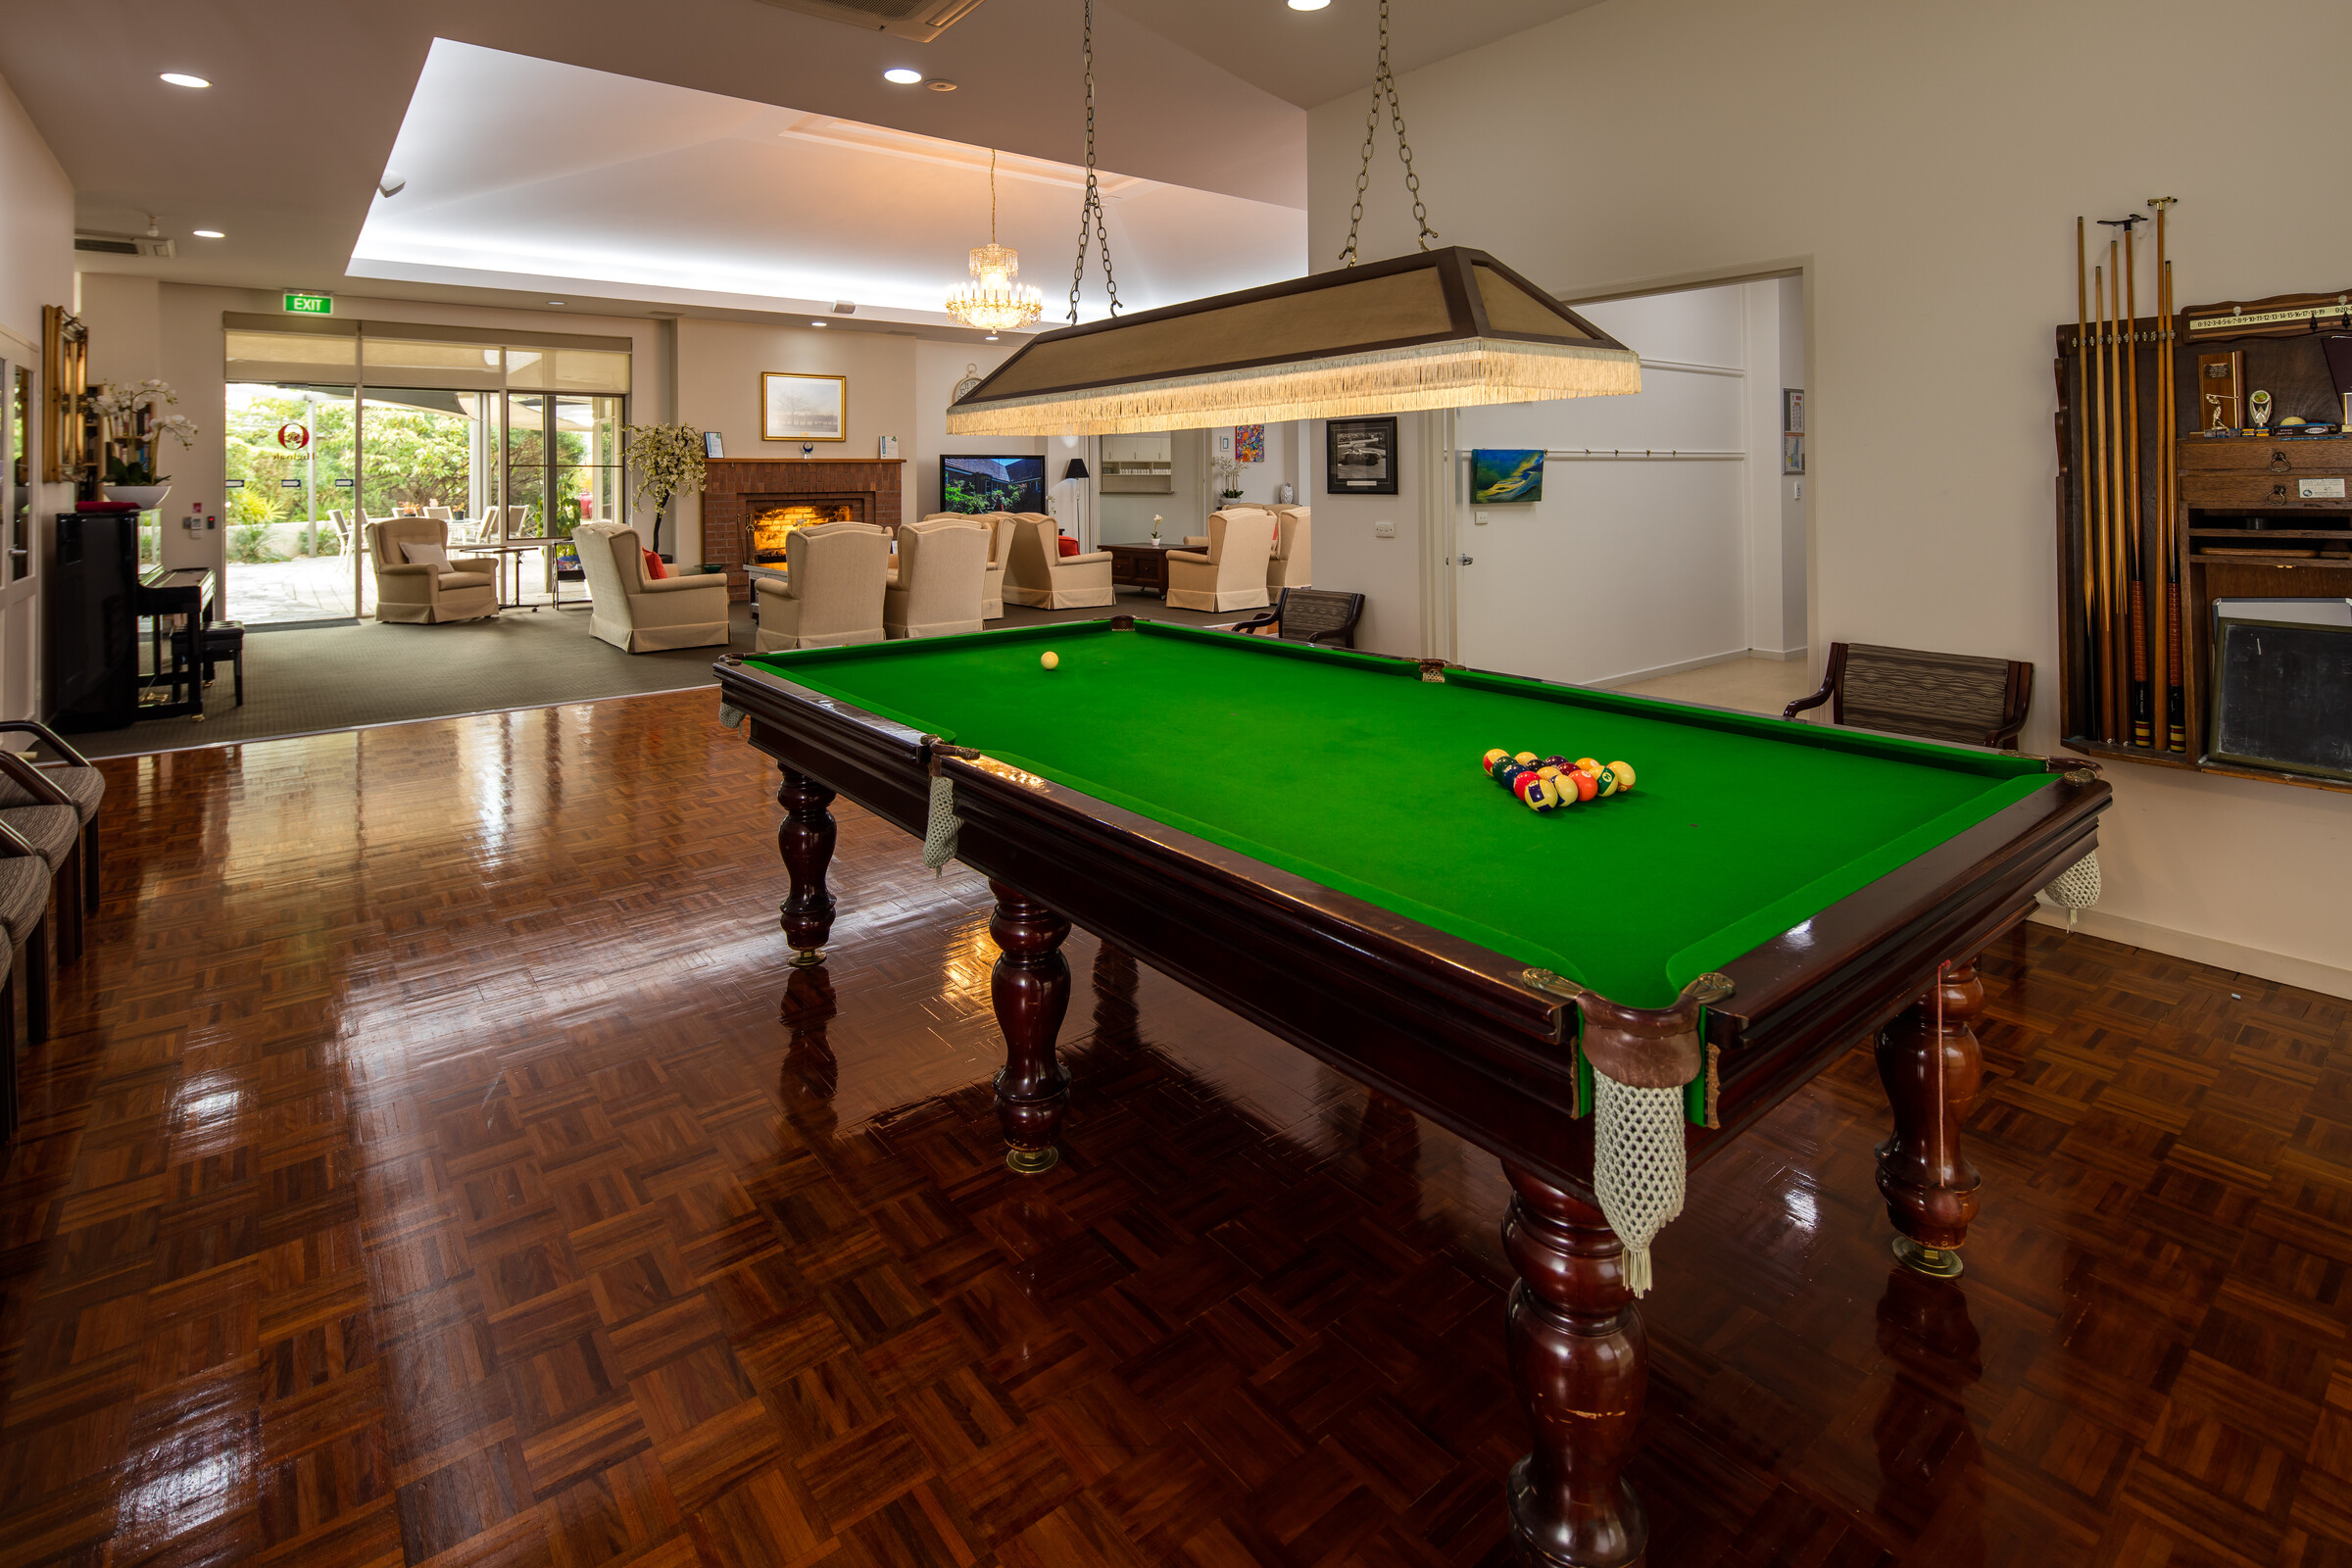 Highvale Village pool table room with lounge, piano and open fireplace in the background